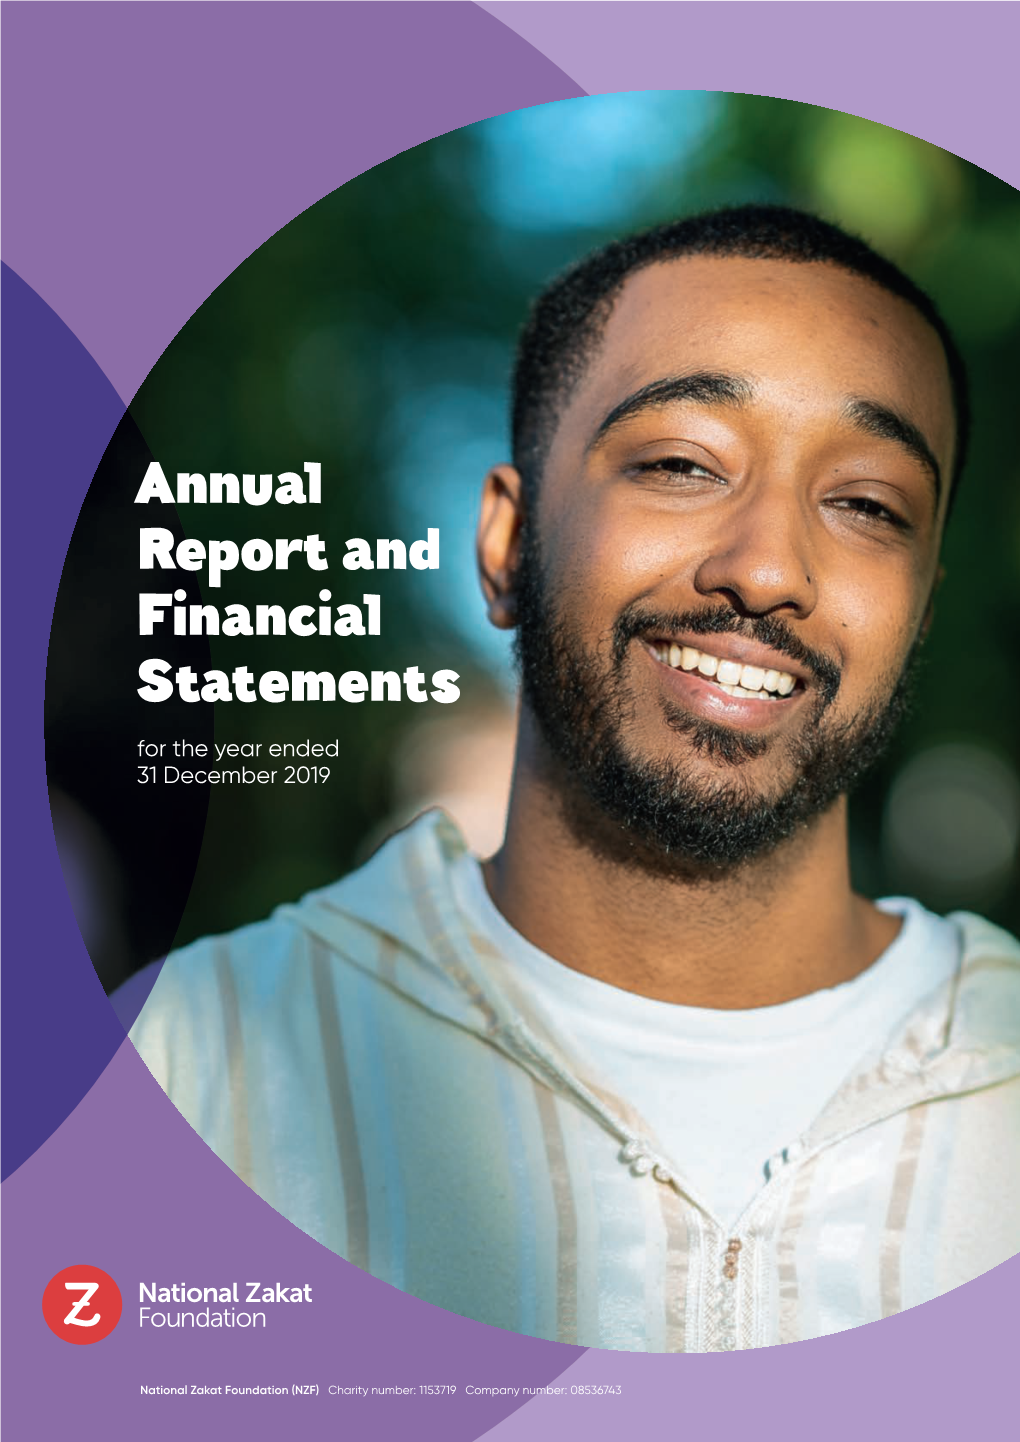 Annual Report and Financial Statements for the Year Ended 31 December 2019